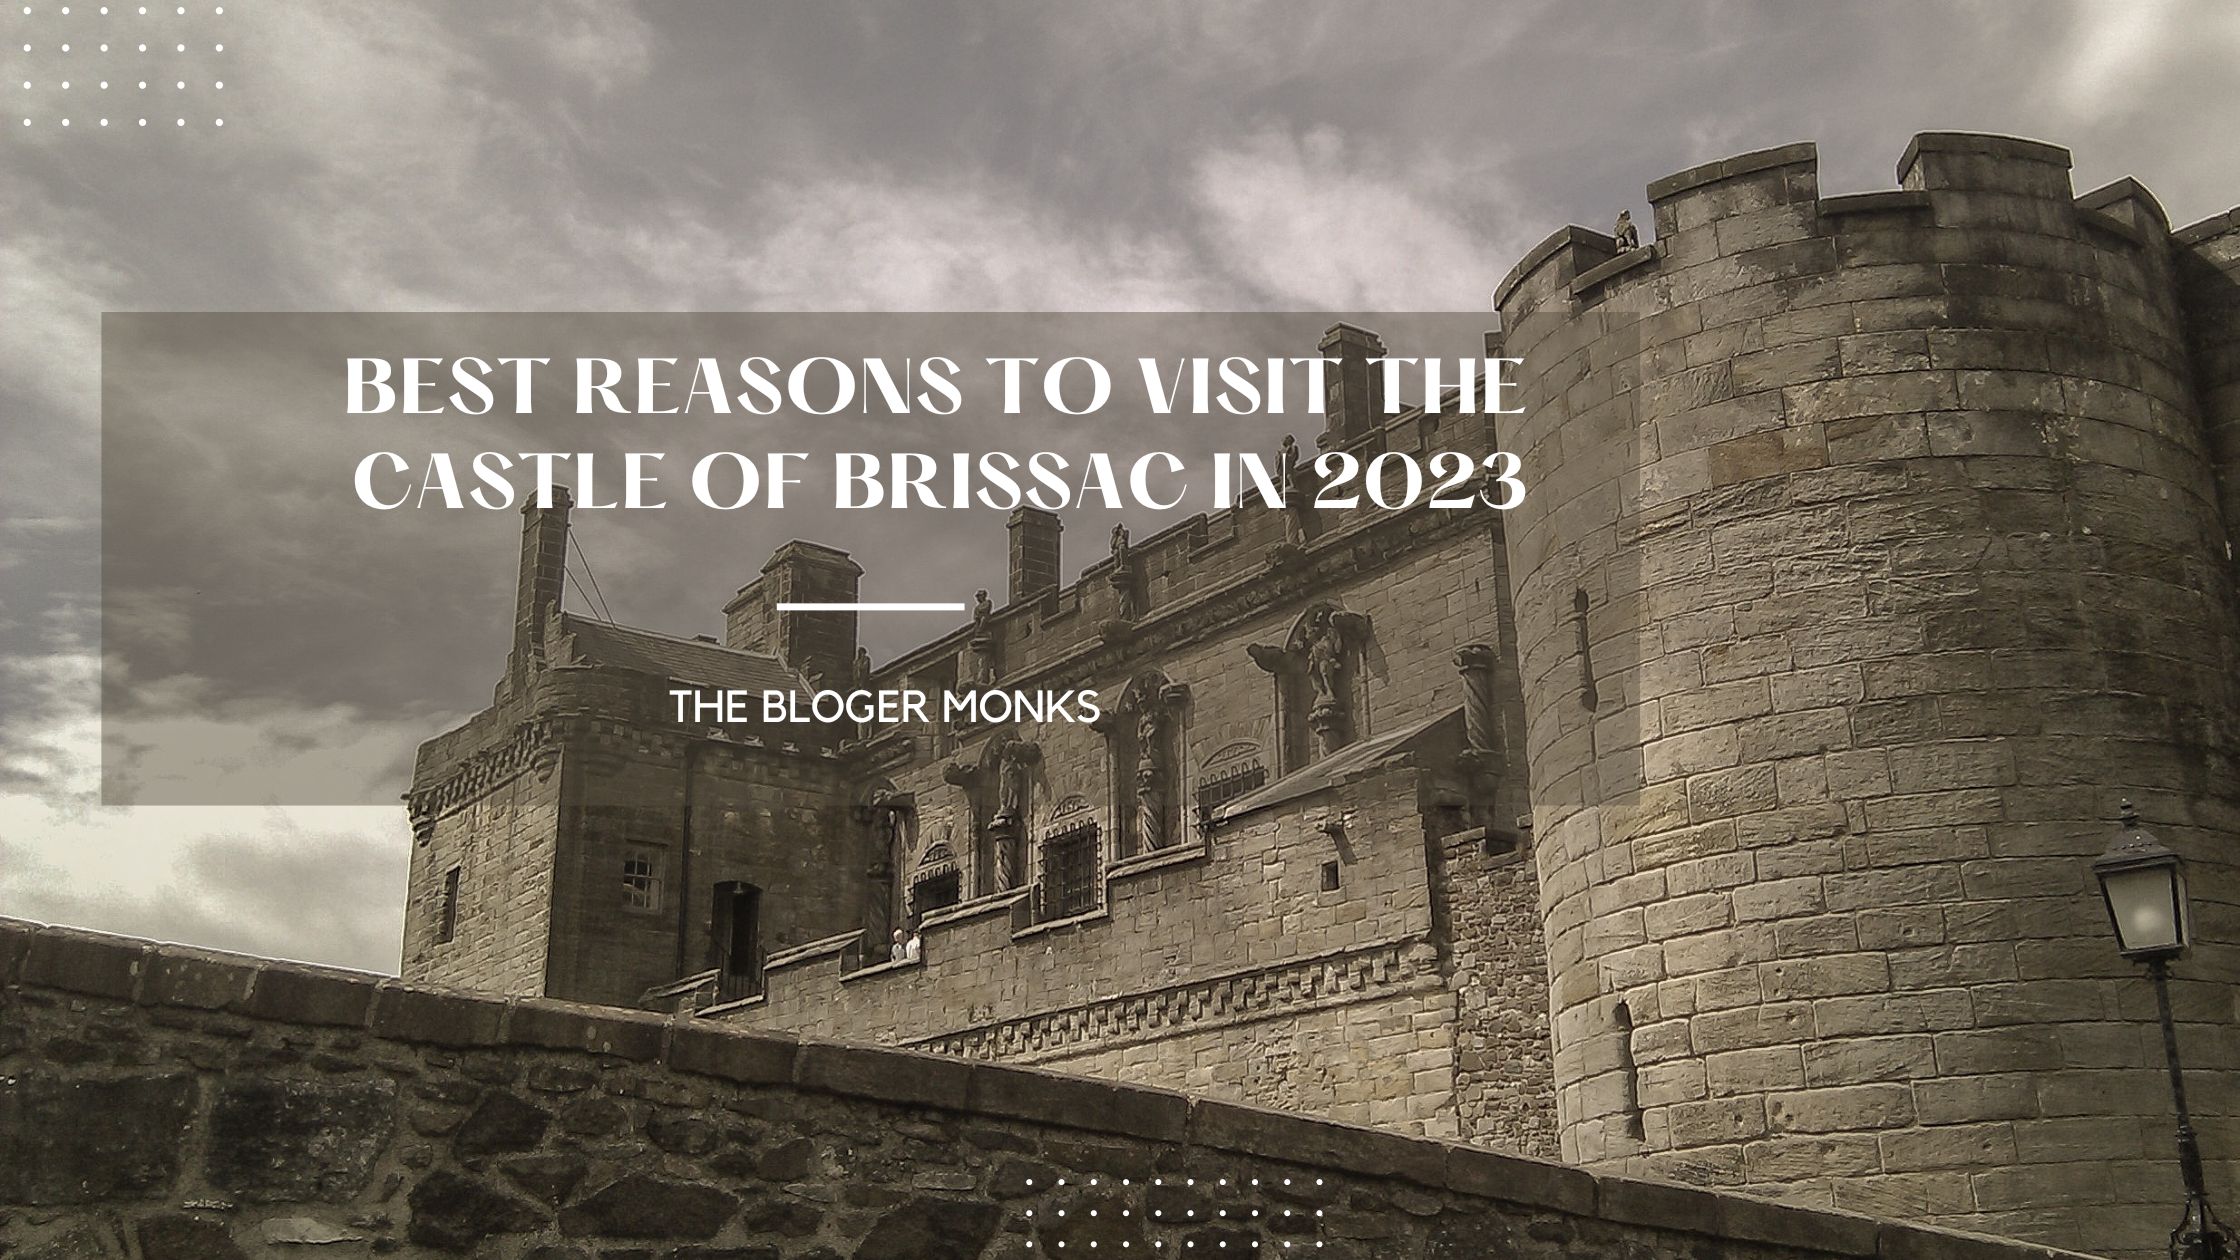 Best Reasons To Visit The Castle of Brissac in 2023